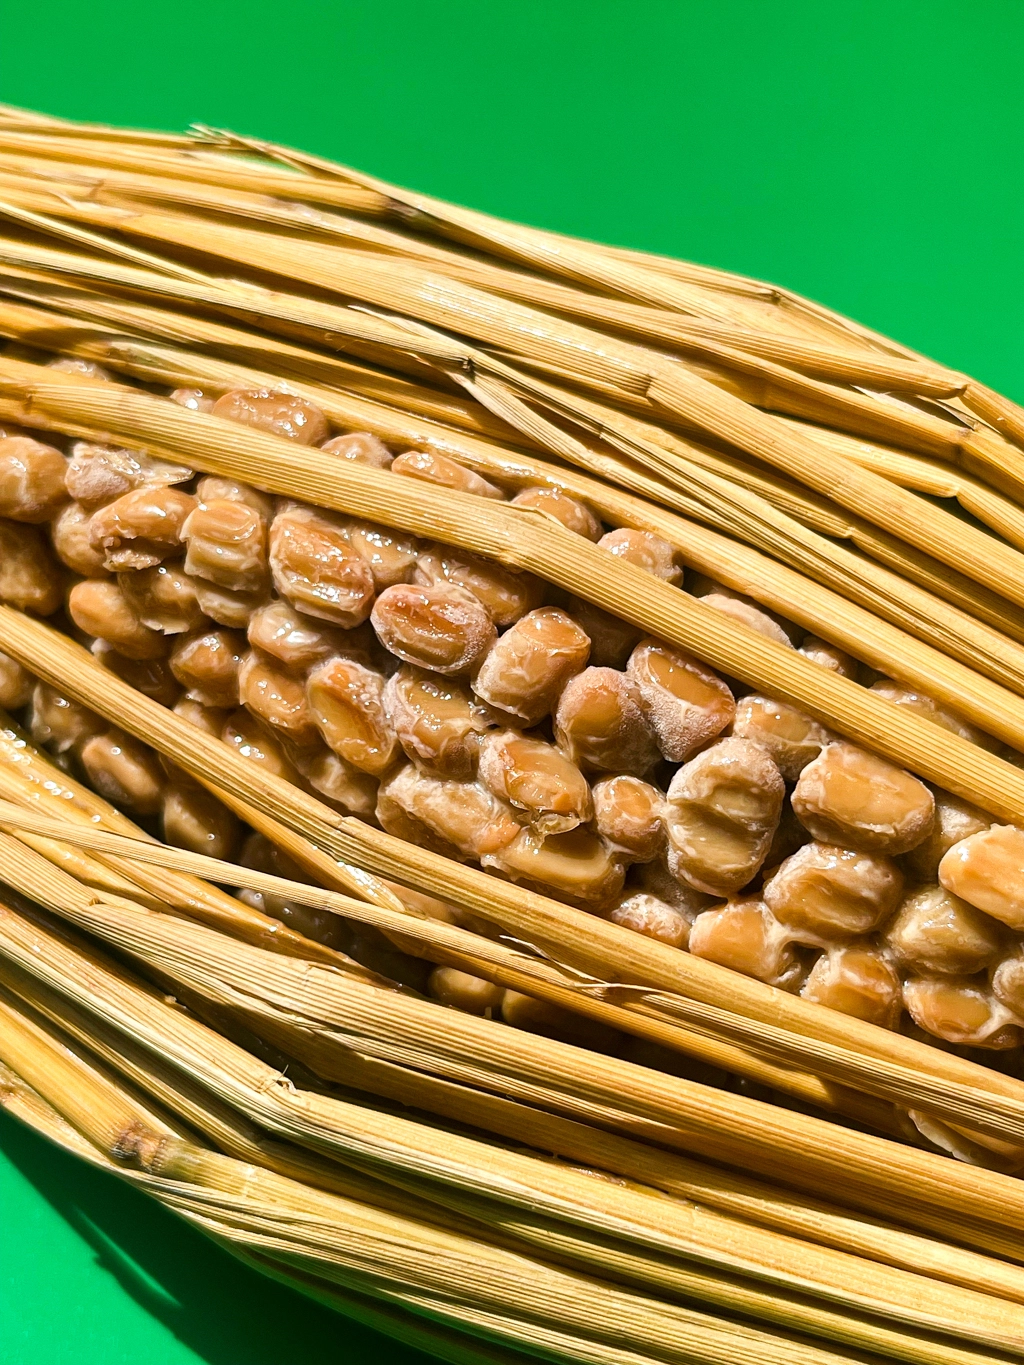 Artwork showing a close-up of natto wrapped in straw. Natto beans are visible through the slightly open straw. The background is a brilliant green.